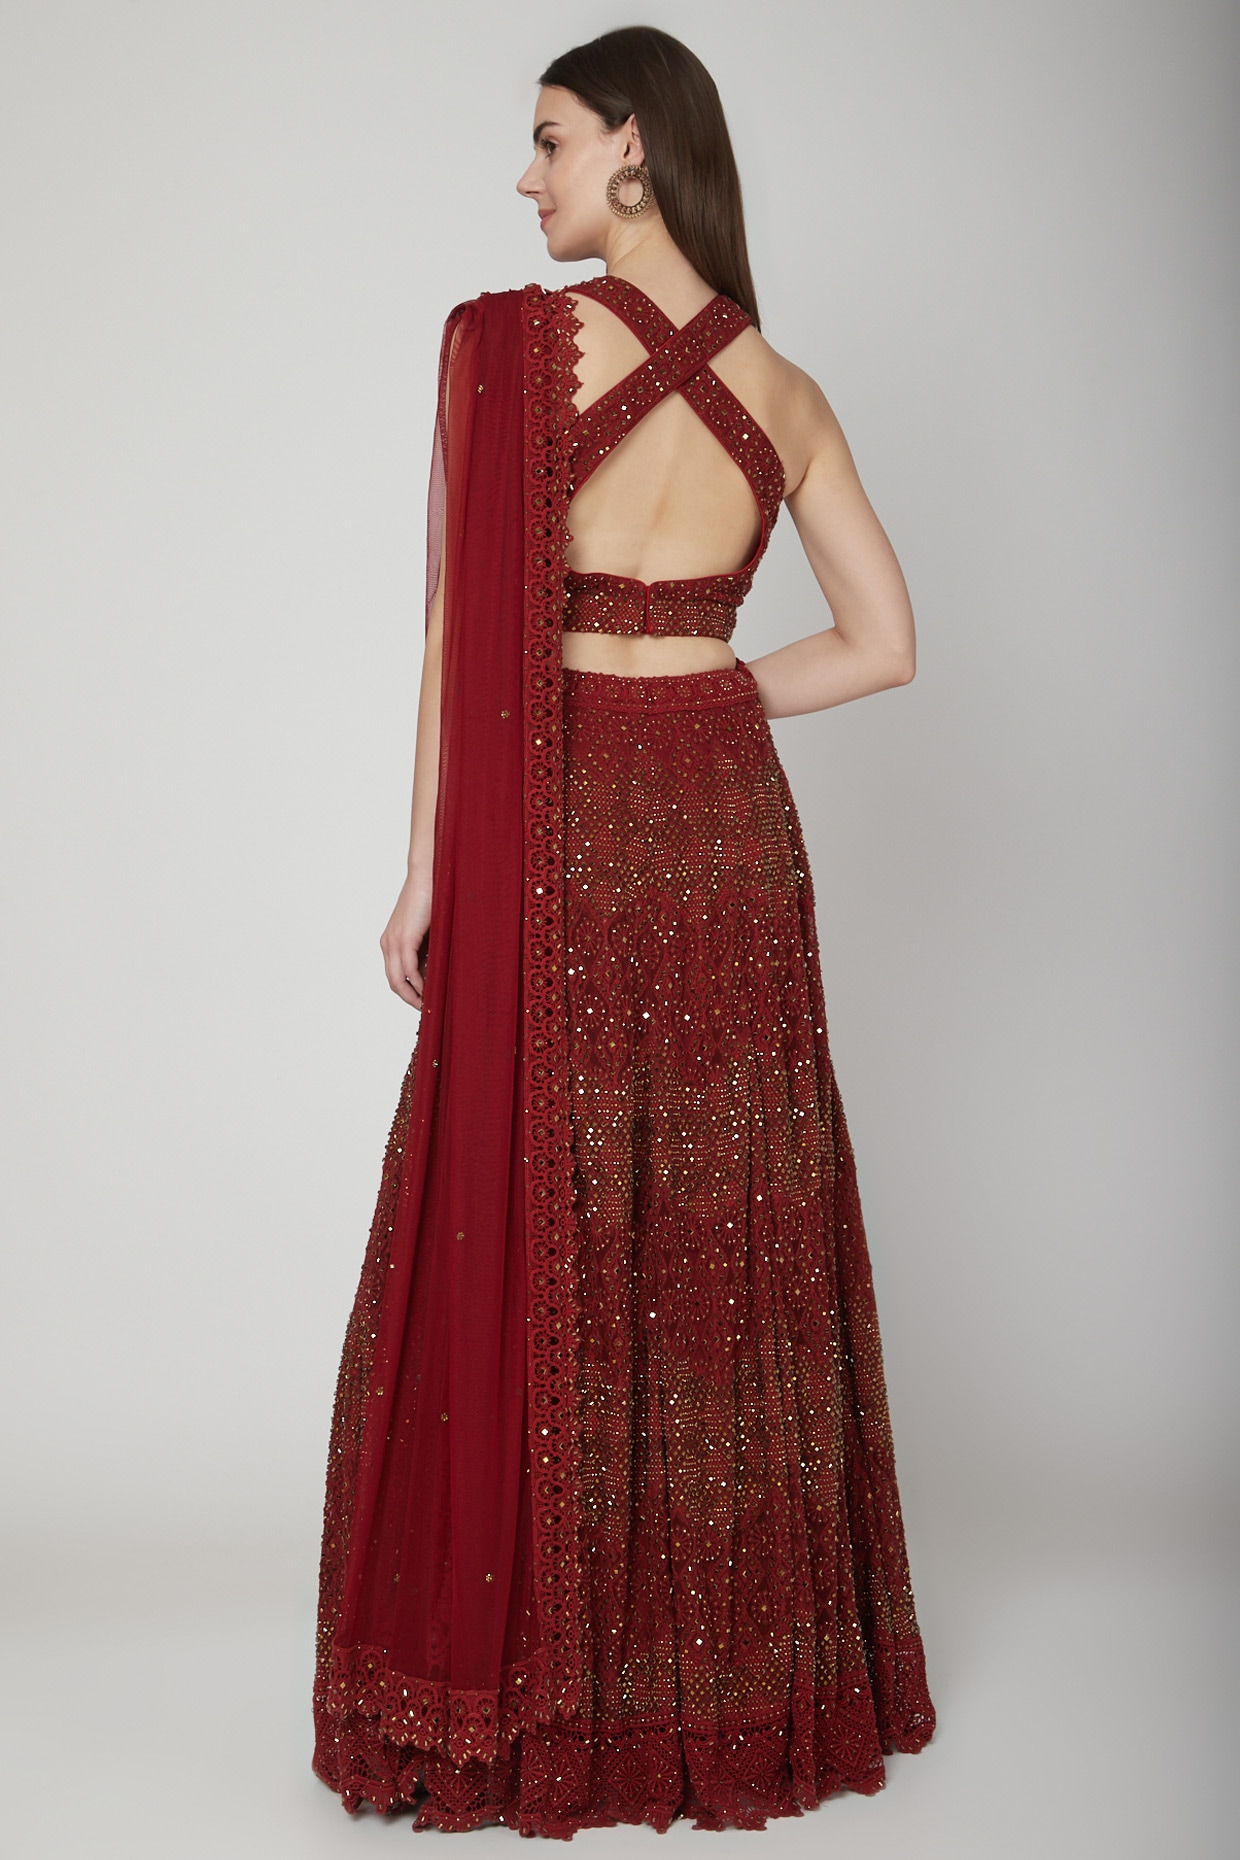 Black embellished blouse. Maroon skirt. Gold net dupatta. | Indian fashion,  Indian attire, Indian outfits